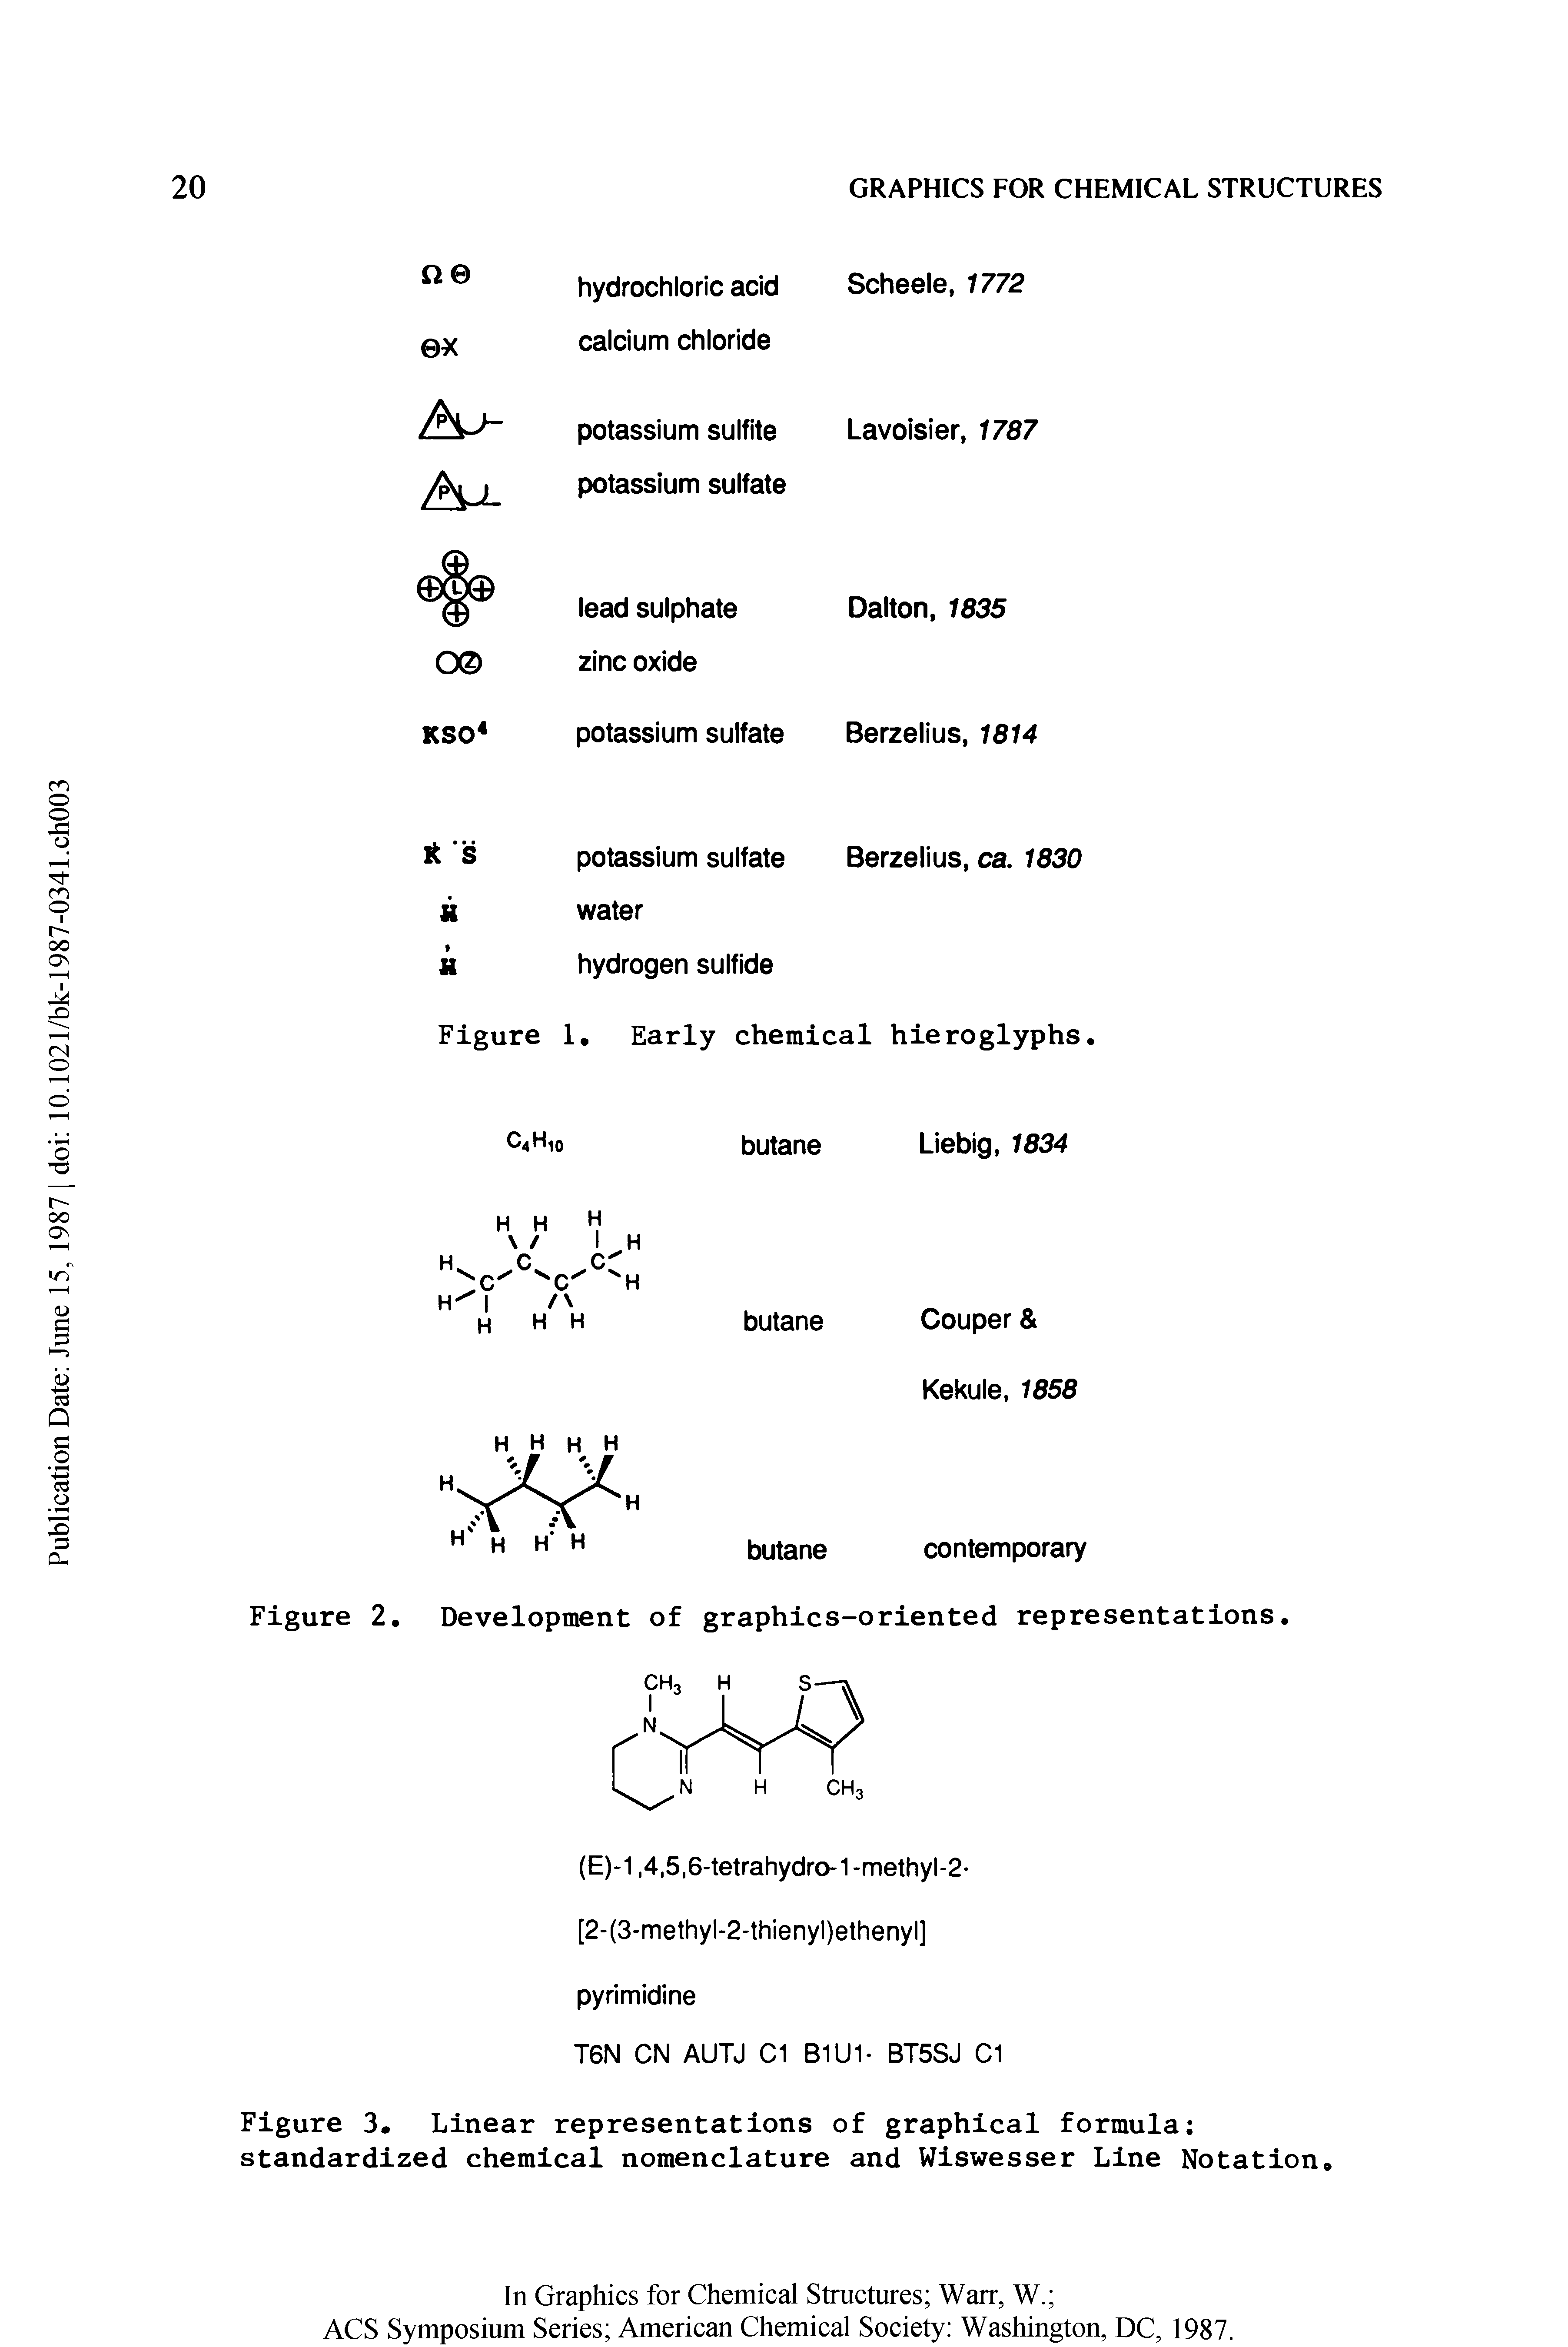 Figure 3. Linear representations of graphical formula standardized chemical nomenclature and Wiswesser Line Notation ...